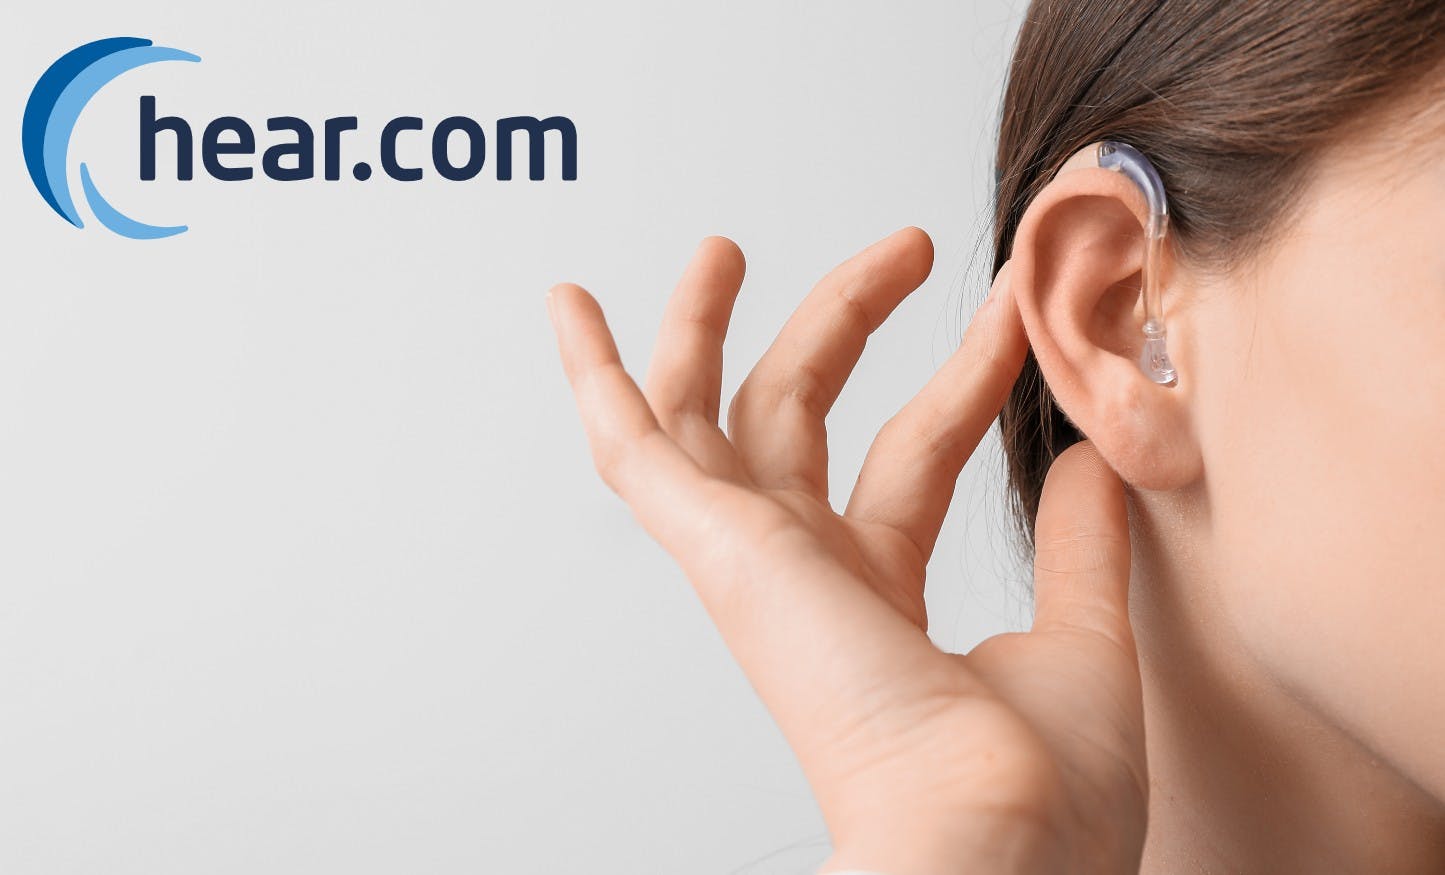 Hear.com: Hearing Aids to Change Your Life